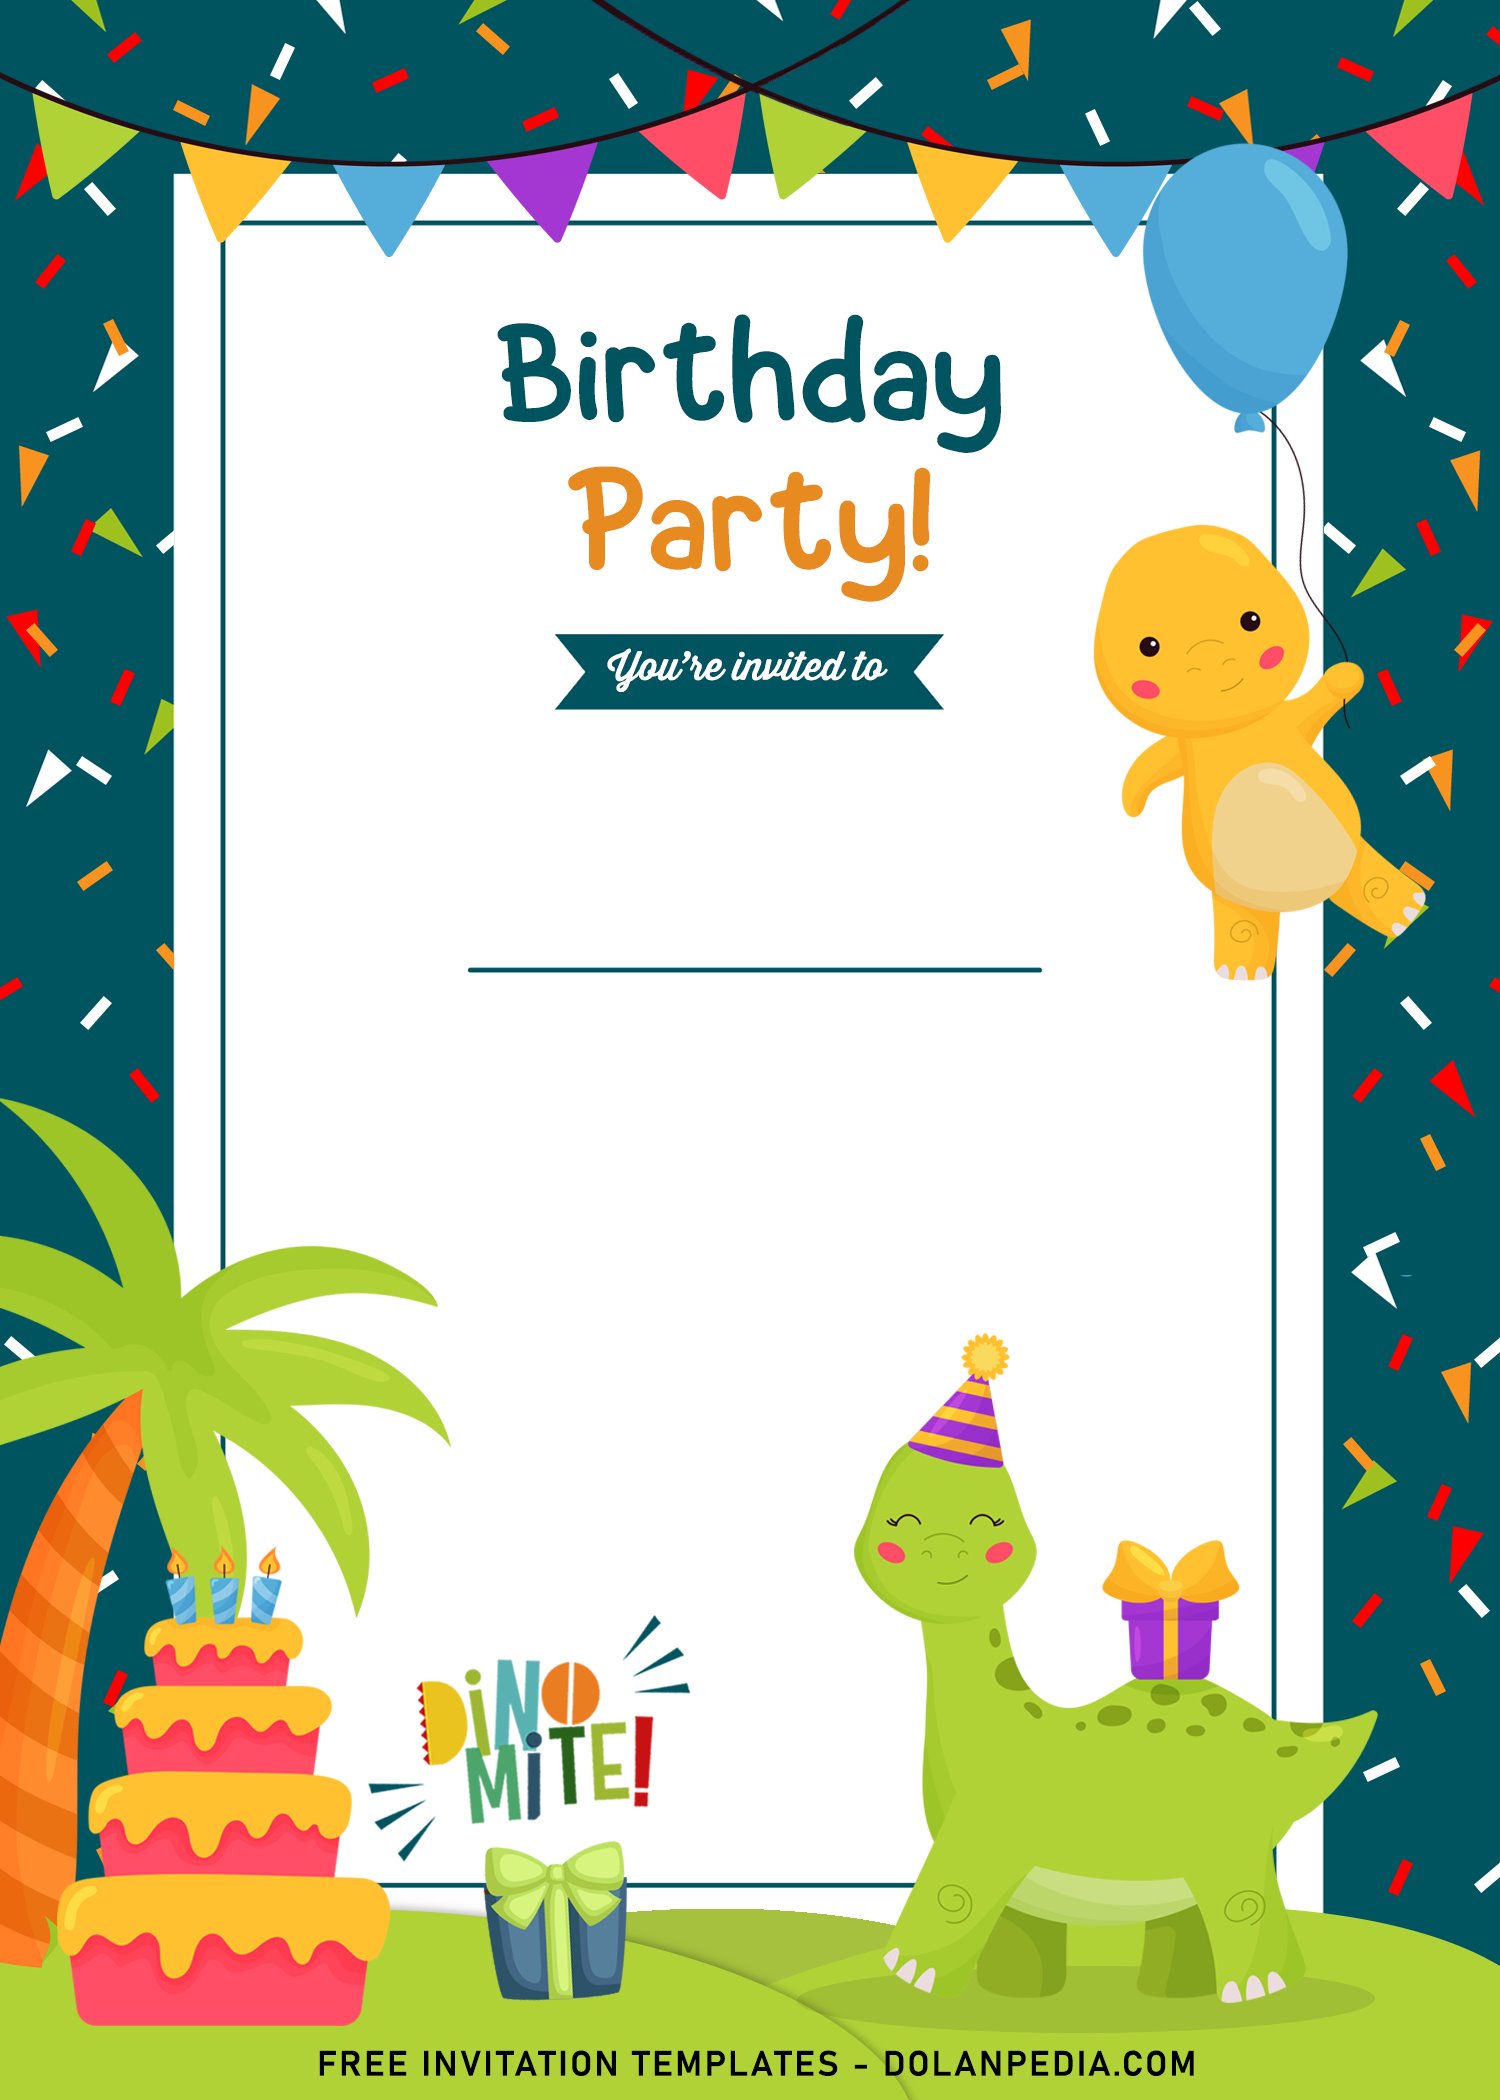 Jurassic World Birthday Party Invites Party Decorations/Accessories Pack of 12 A5 Invitations with Envelopes Dinosaur Landscape Frame Design